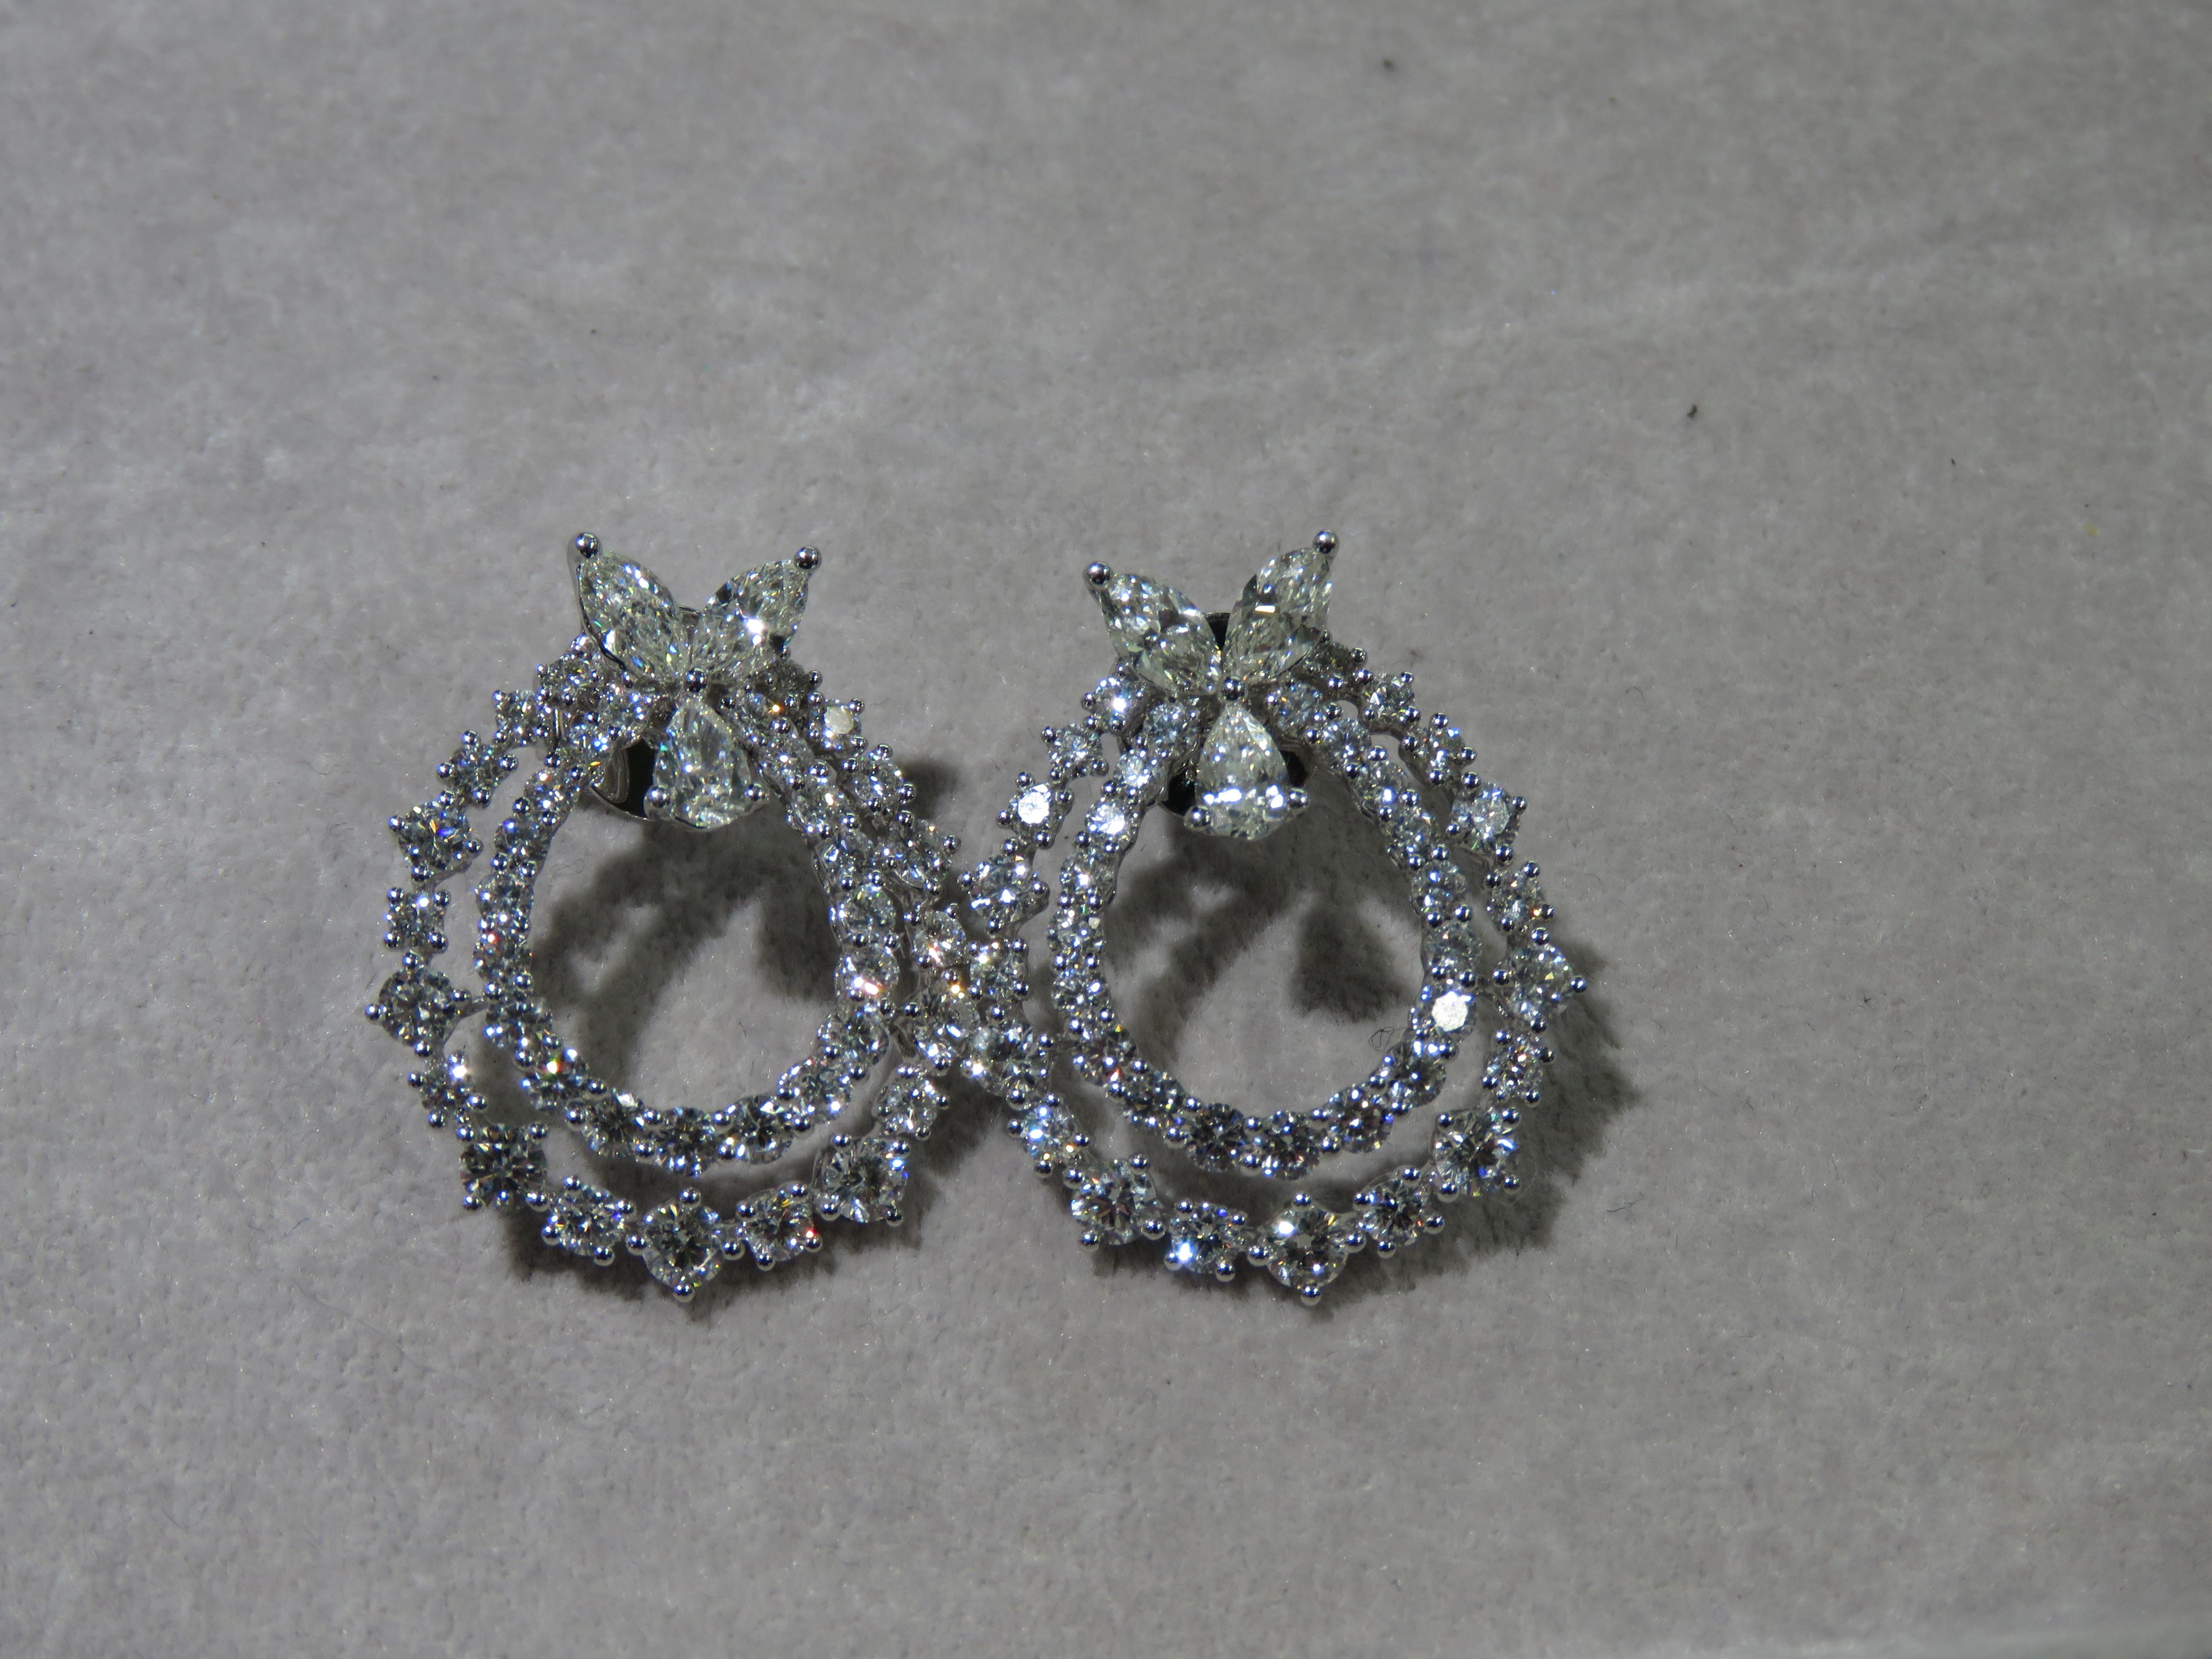 The Following Items we are offering is a Rare Important Radiant 18KT Gold Glamorous and Elaborate Rare Magnificent Glittering White Diamond Circular Round Bow Earrings. Earrings feature Rare Sparkling White Diamonds set in 18KT Gold!! T.C.W. Approx